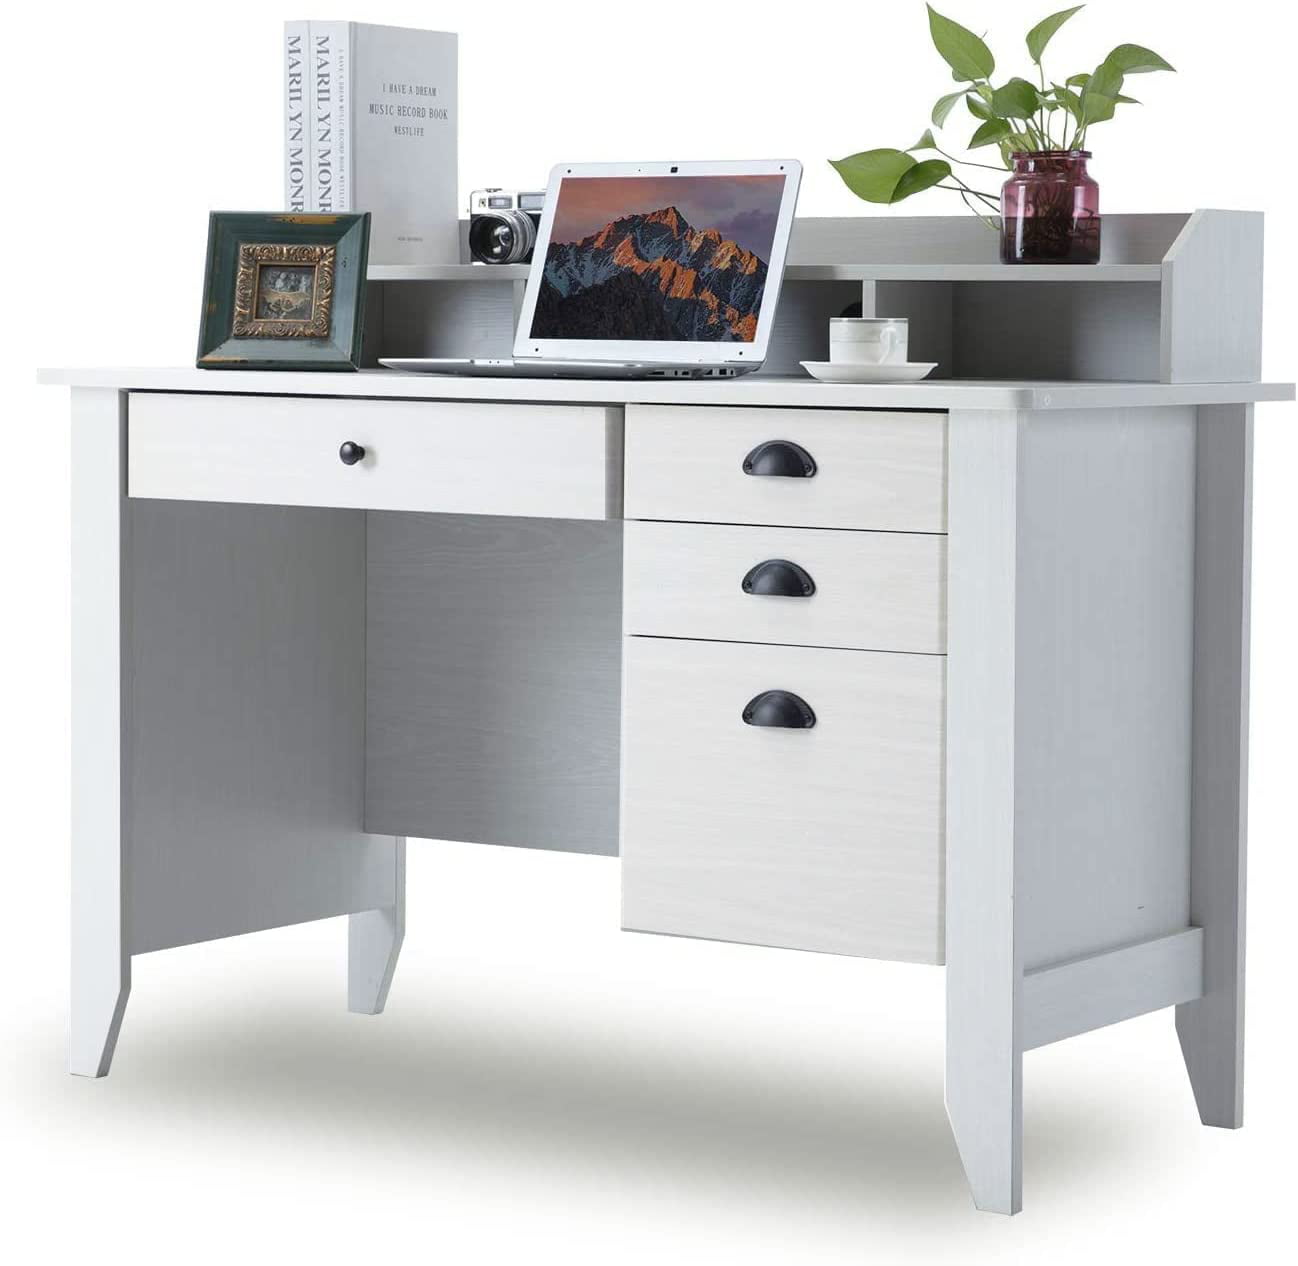 Catrimown 47.5 in Computer Desk with 4 Drawers, White Desk Wood Home Office Desk with Hutch, Vintage Study Table Writing Desk with Shelf for Small Spaces - 3